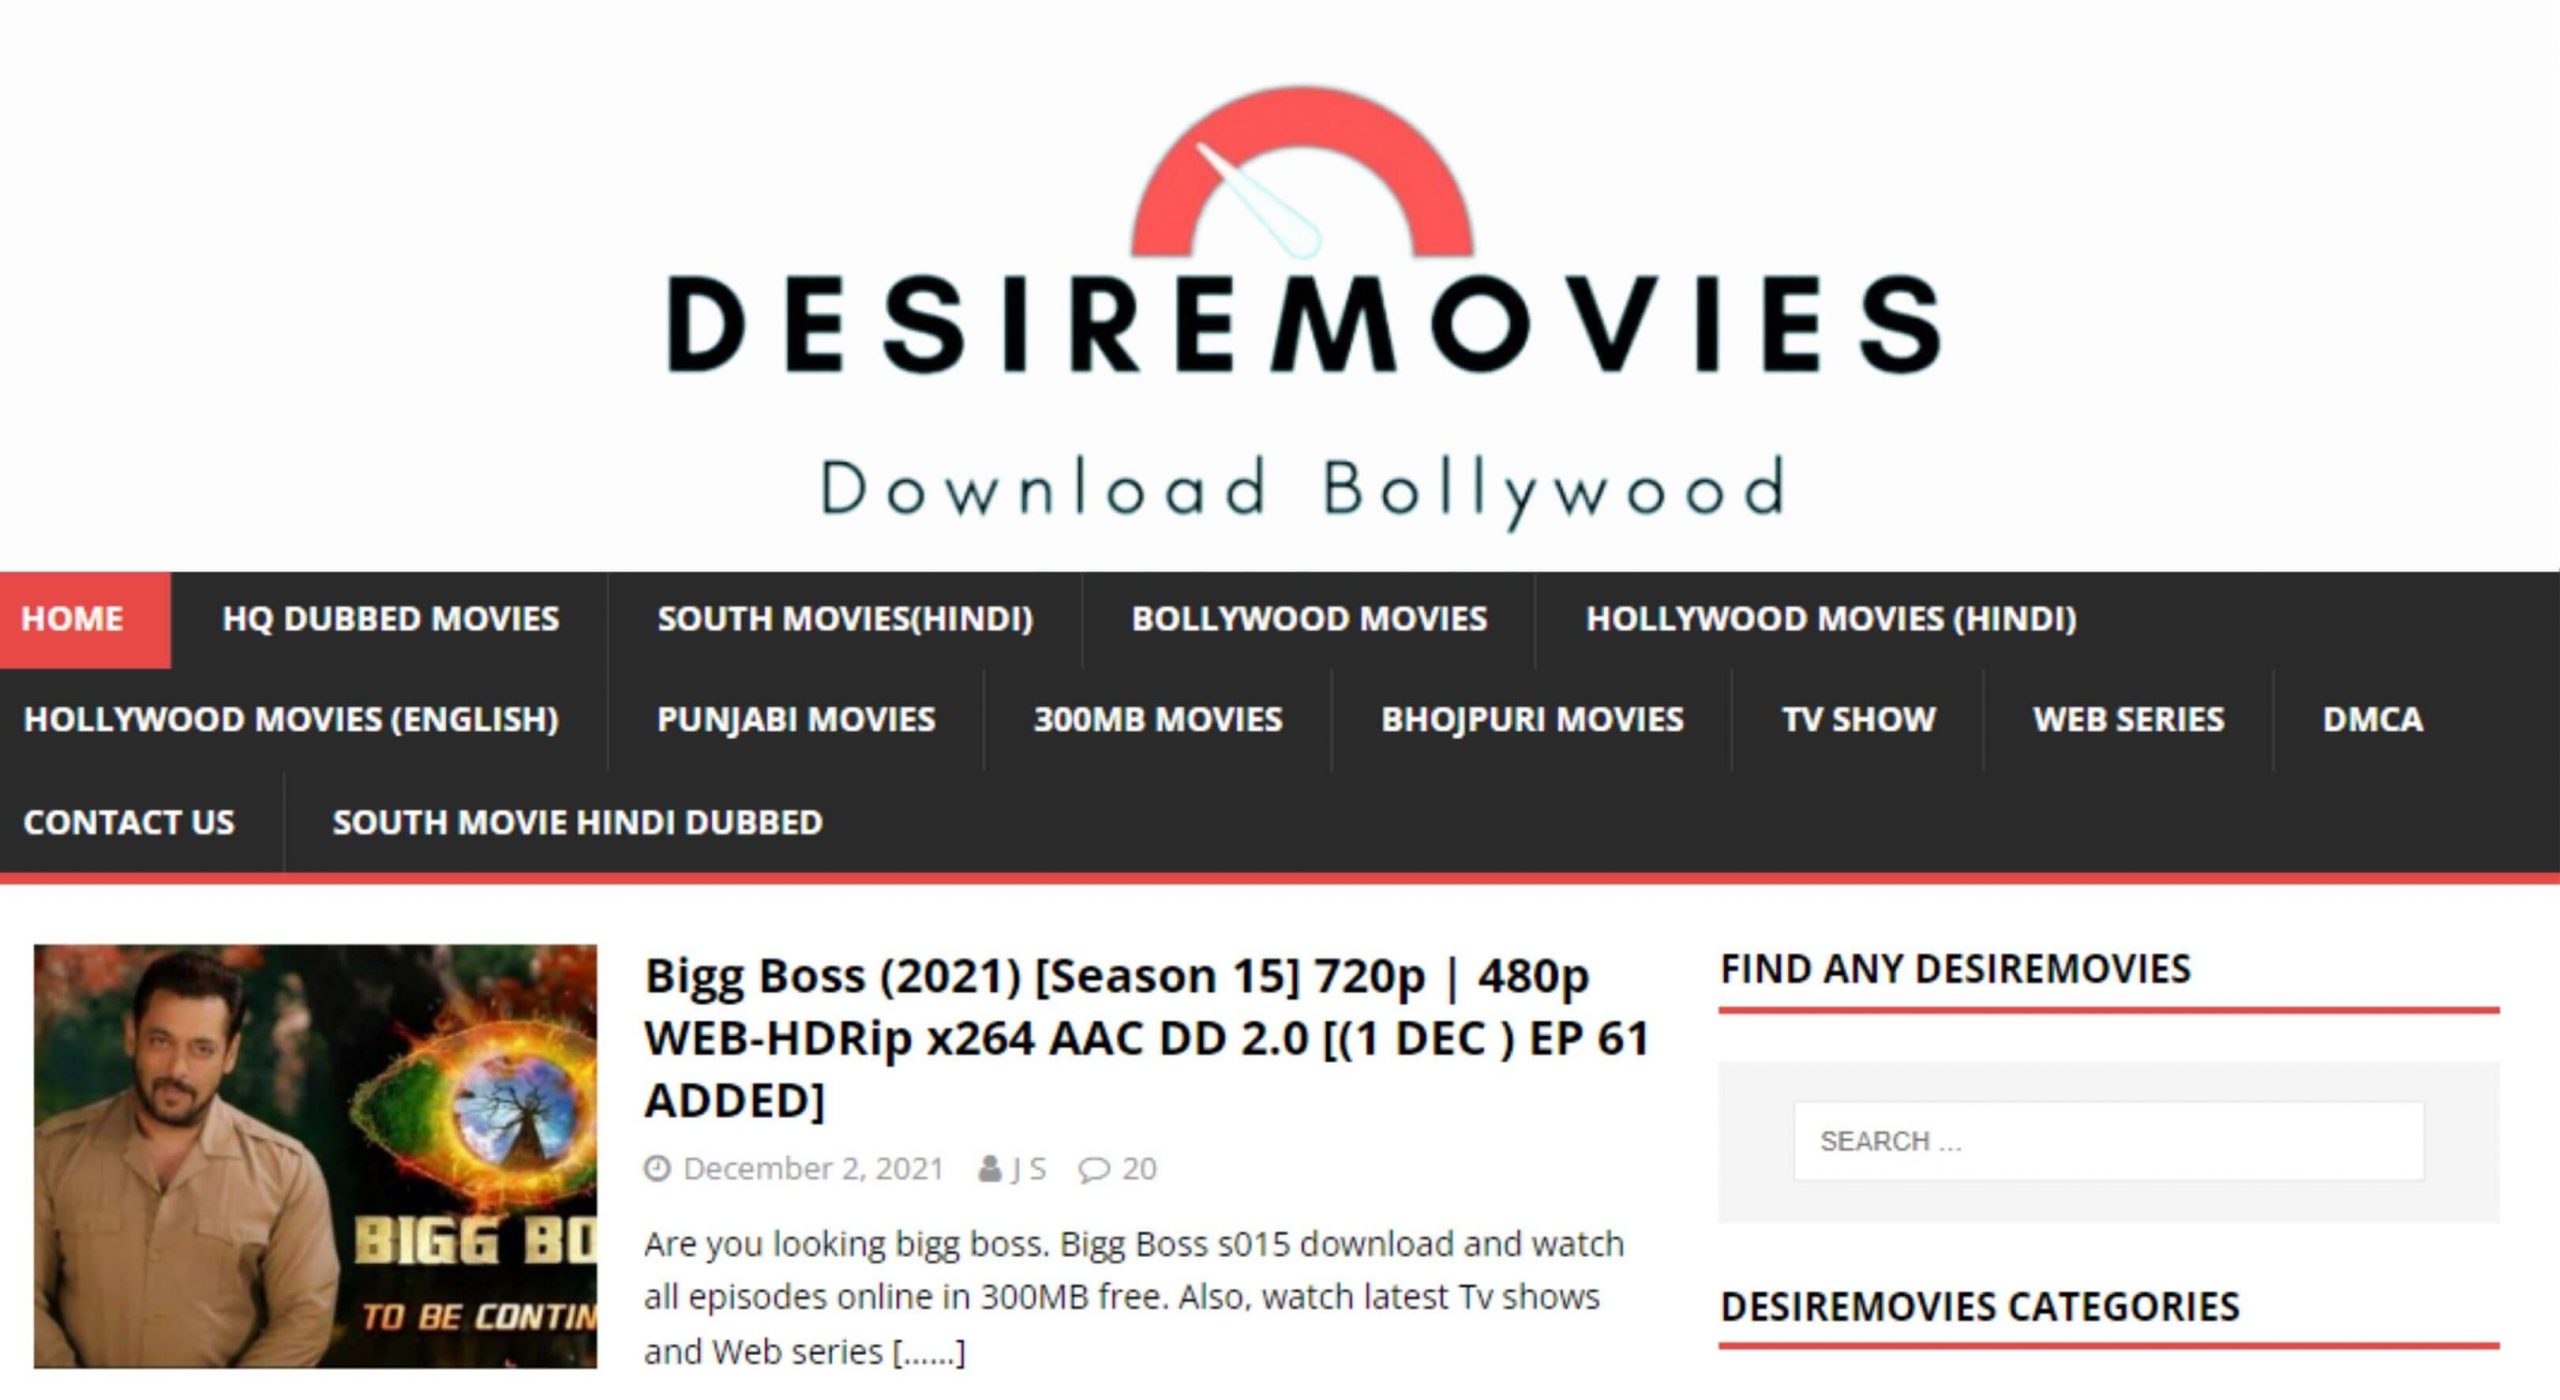 Desiremovies: What is this & Is It Safe To Download Movies?